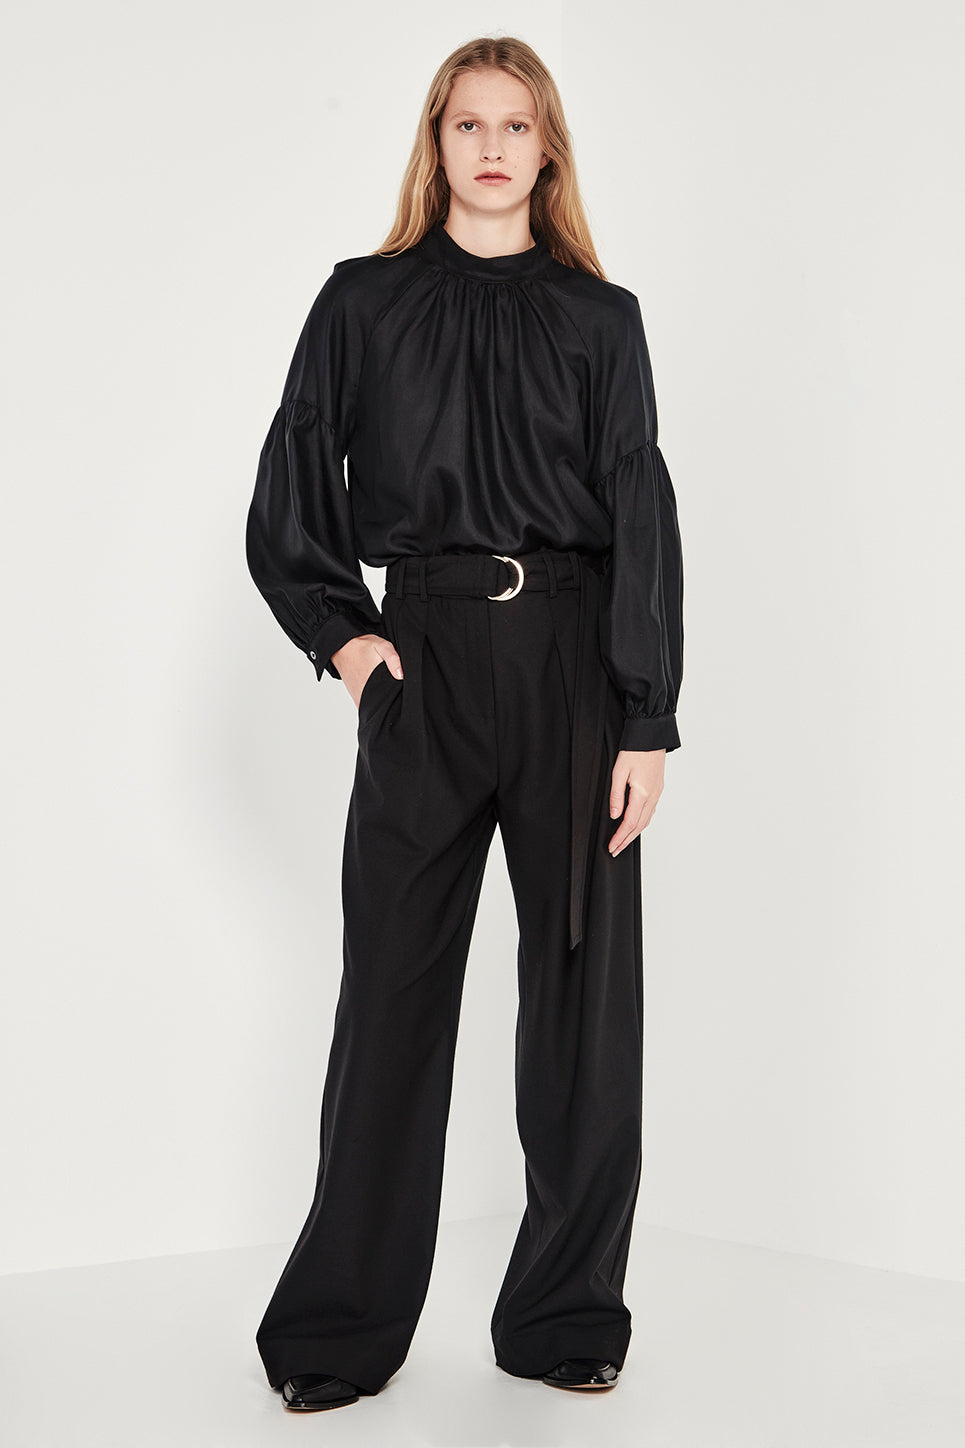 The Asher Trouser in Black